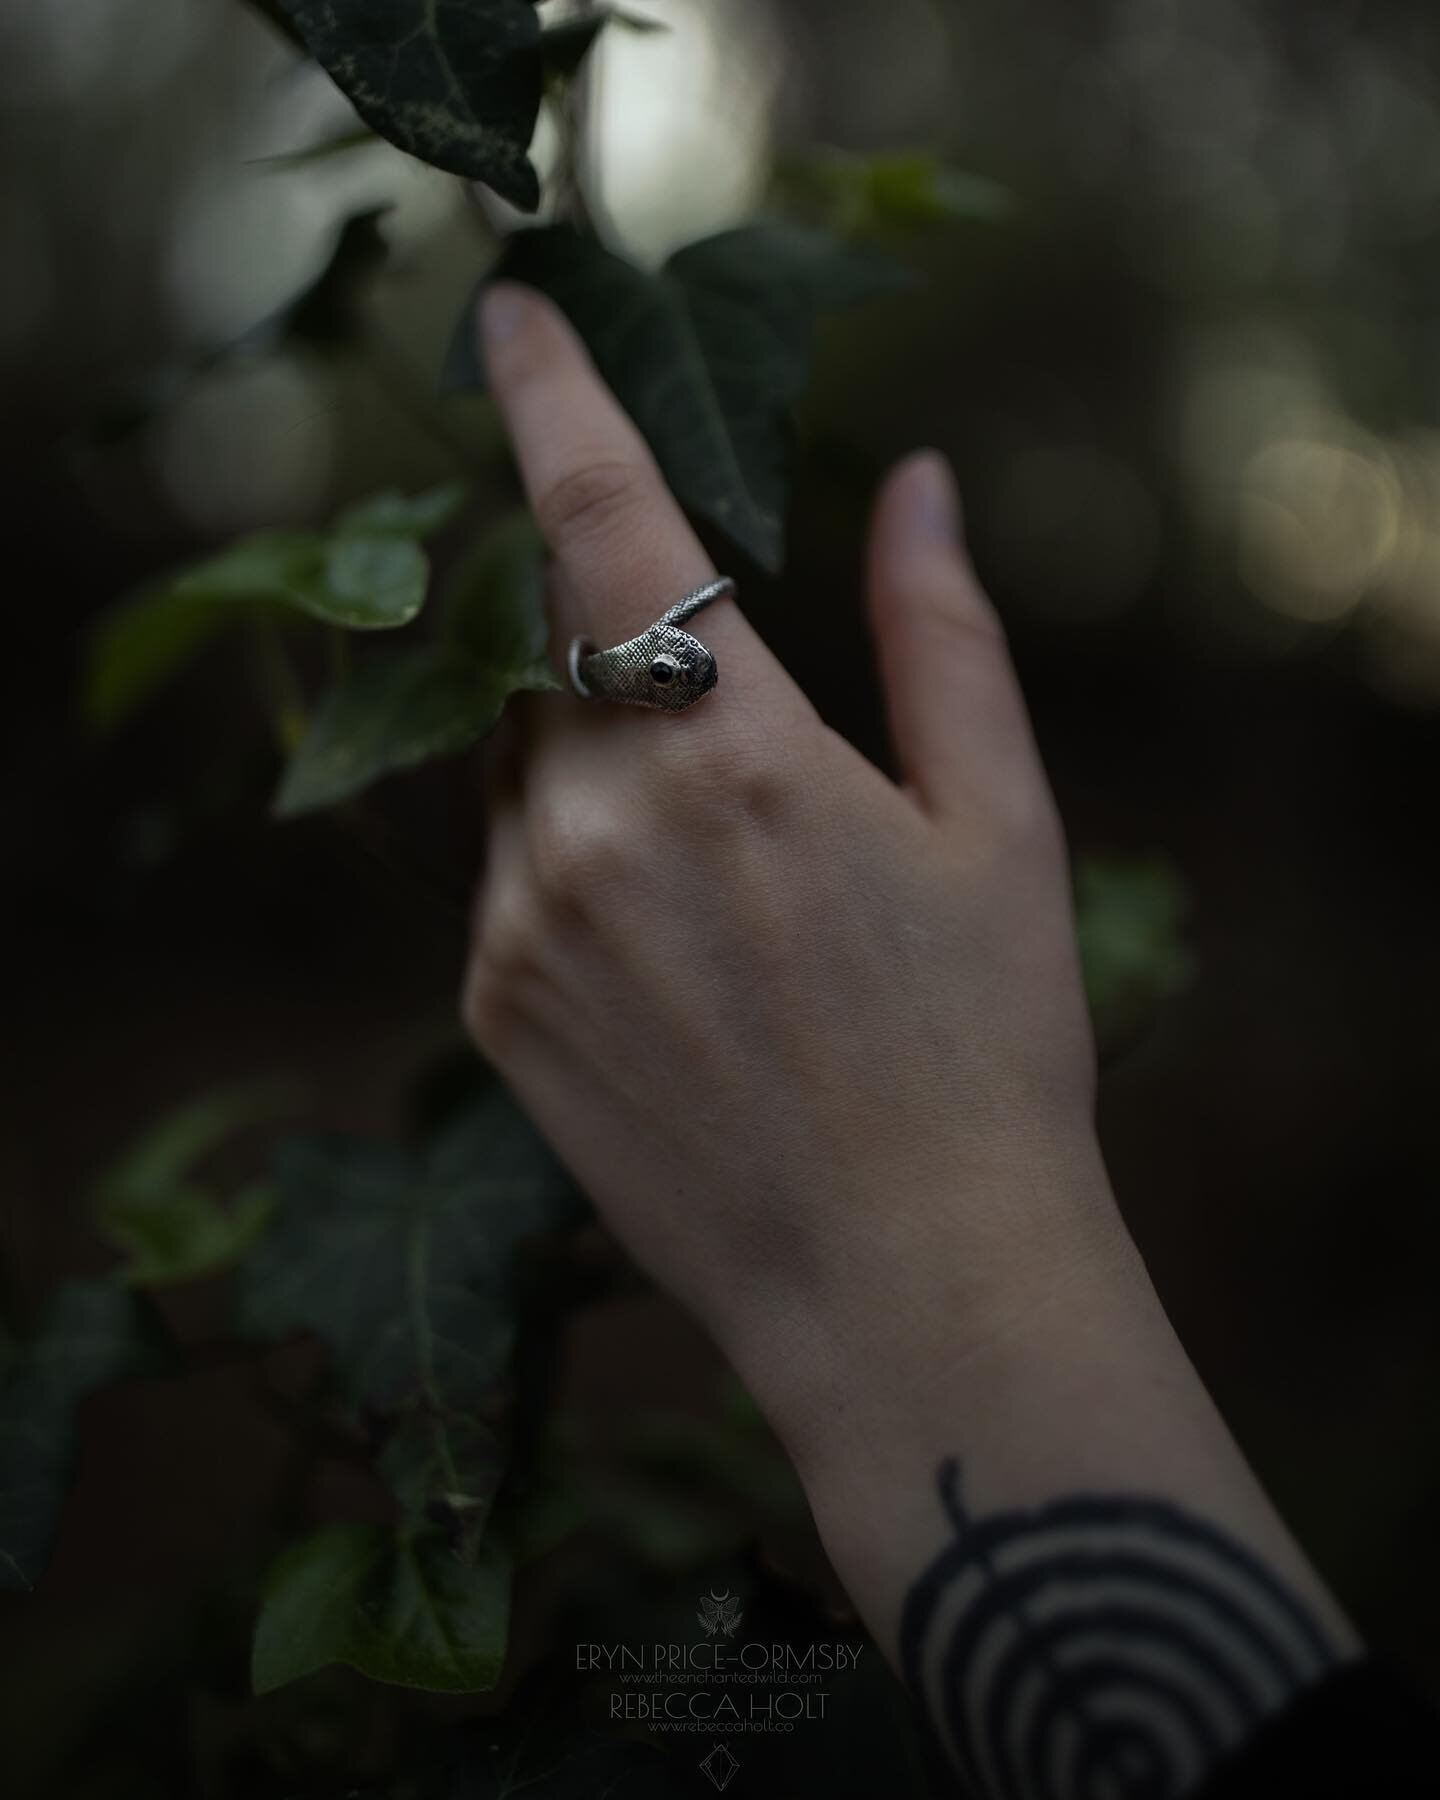 Swipe-&gt; Onyx Cobra Ring available in size 8 and size 9. Please tap the image to view the product tags, and tap a product tag to checkout on my website. 

Cast cobra i soldered into a ring design with an onyx set in fine silver on the head.